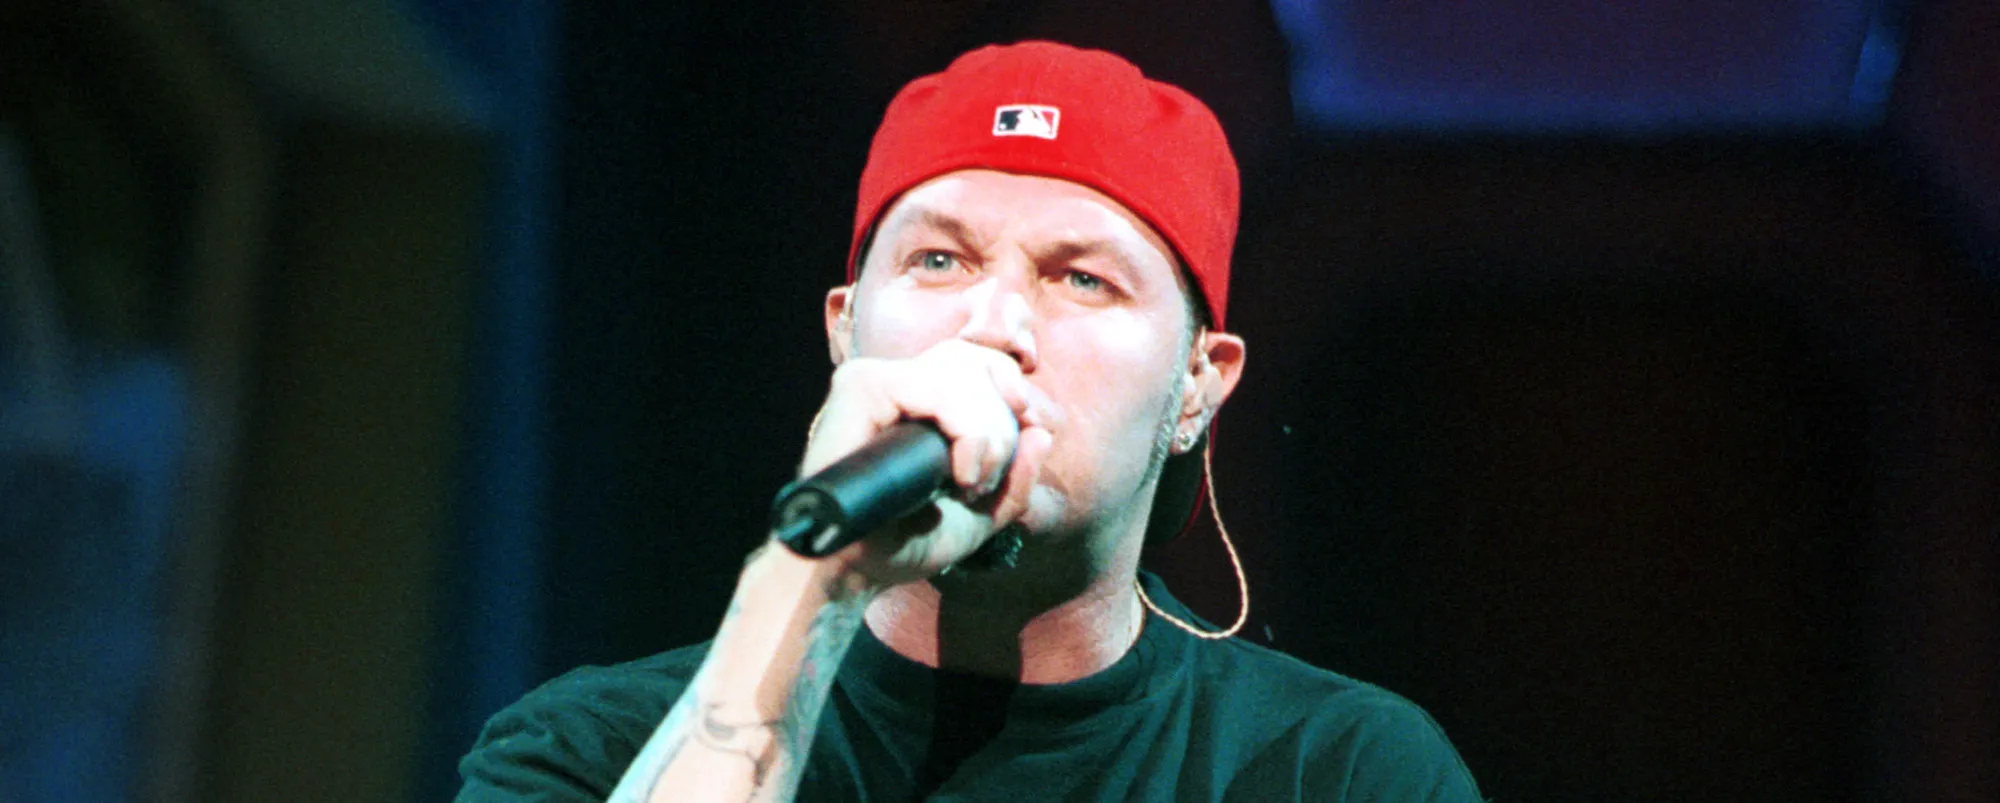 Remember These 5 Nu Metal Stars? Here’s Where They Are Now